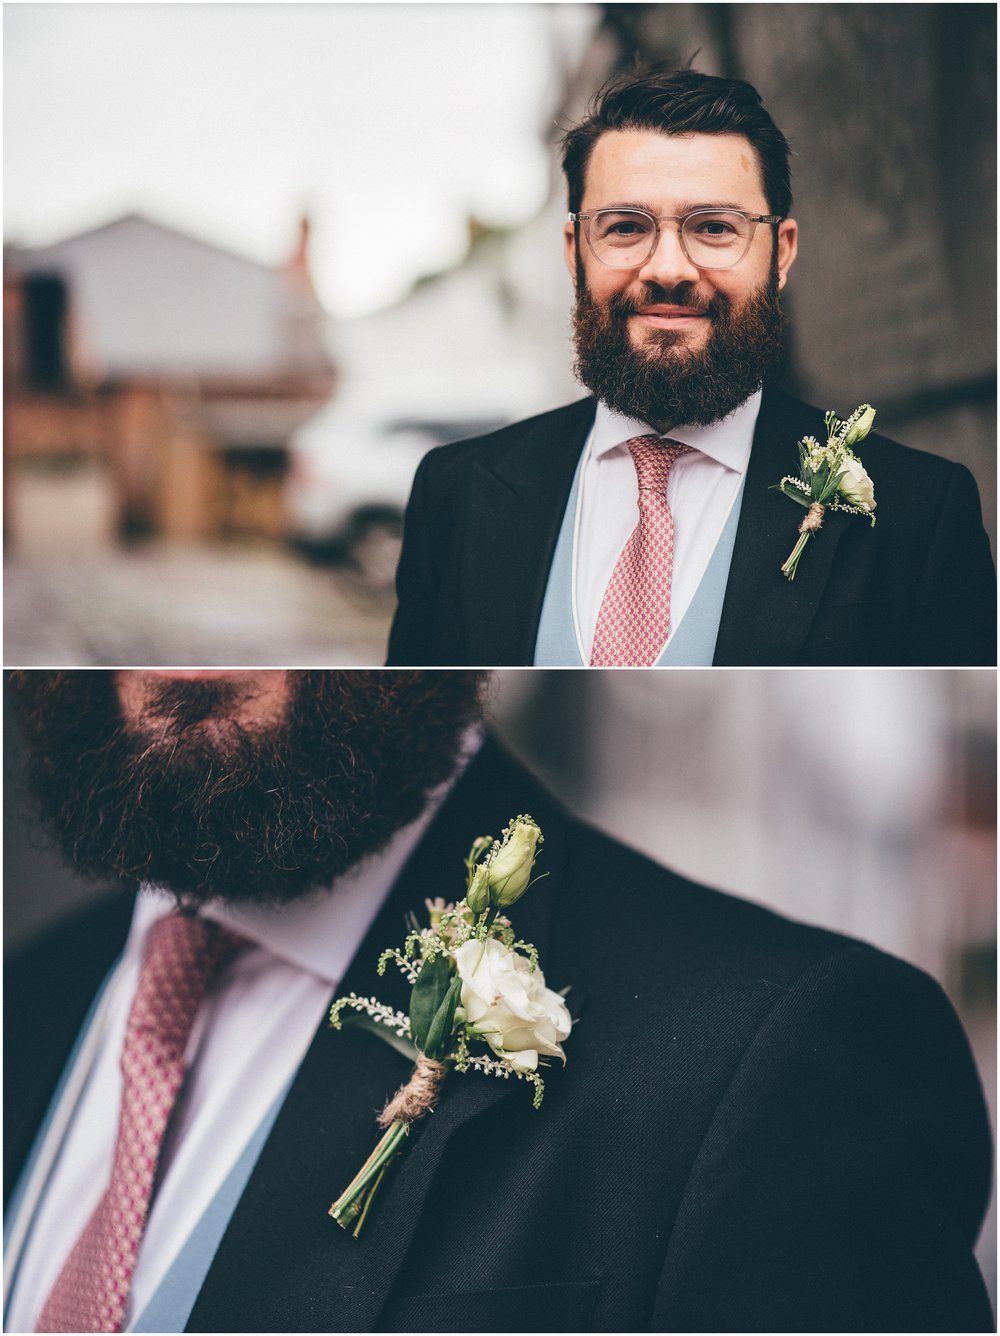 Details of the Grooms wedding day outfit